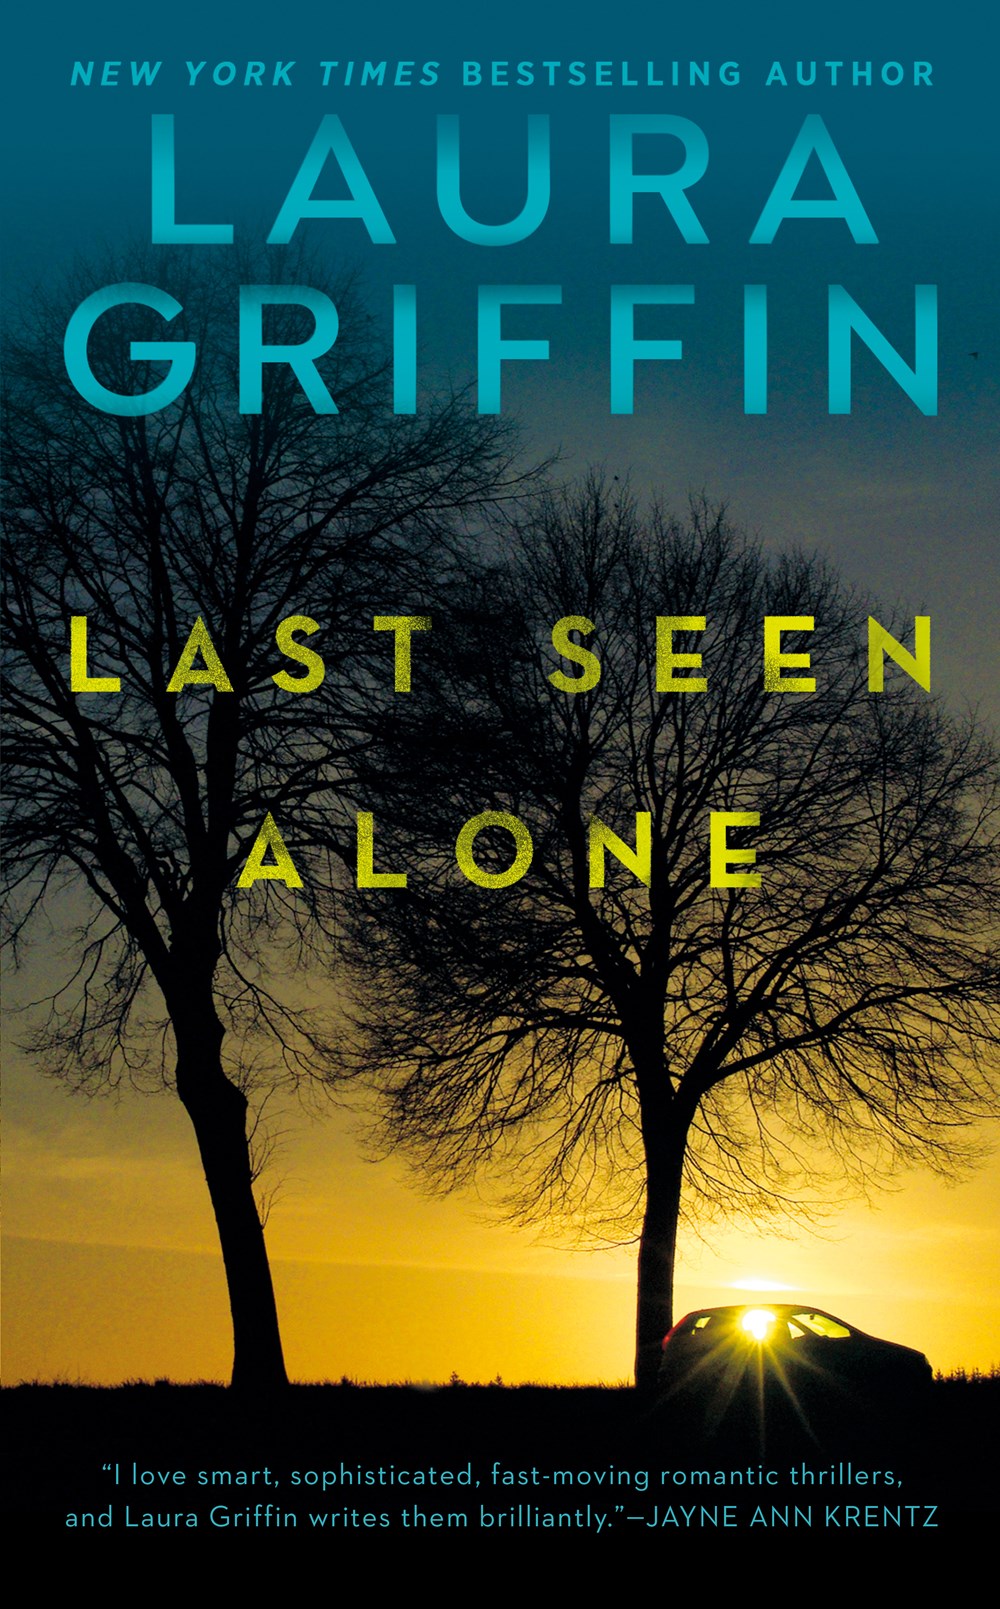 Book Review: Last Seen Alone by Laura Griffin